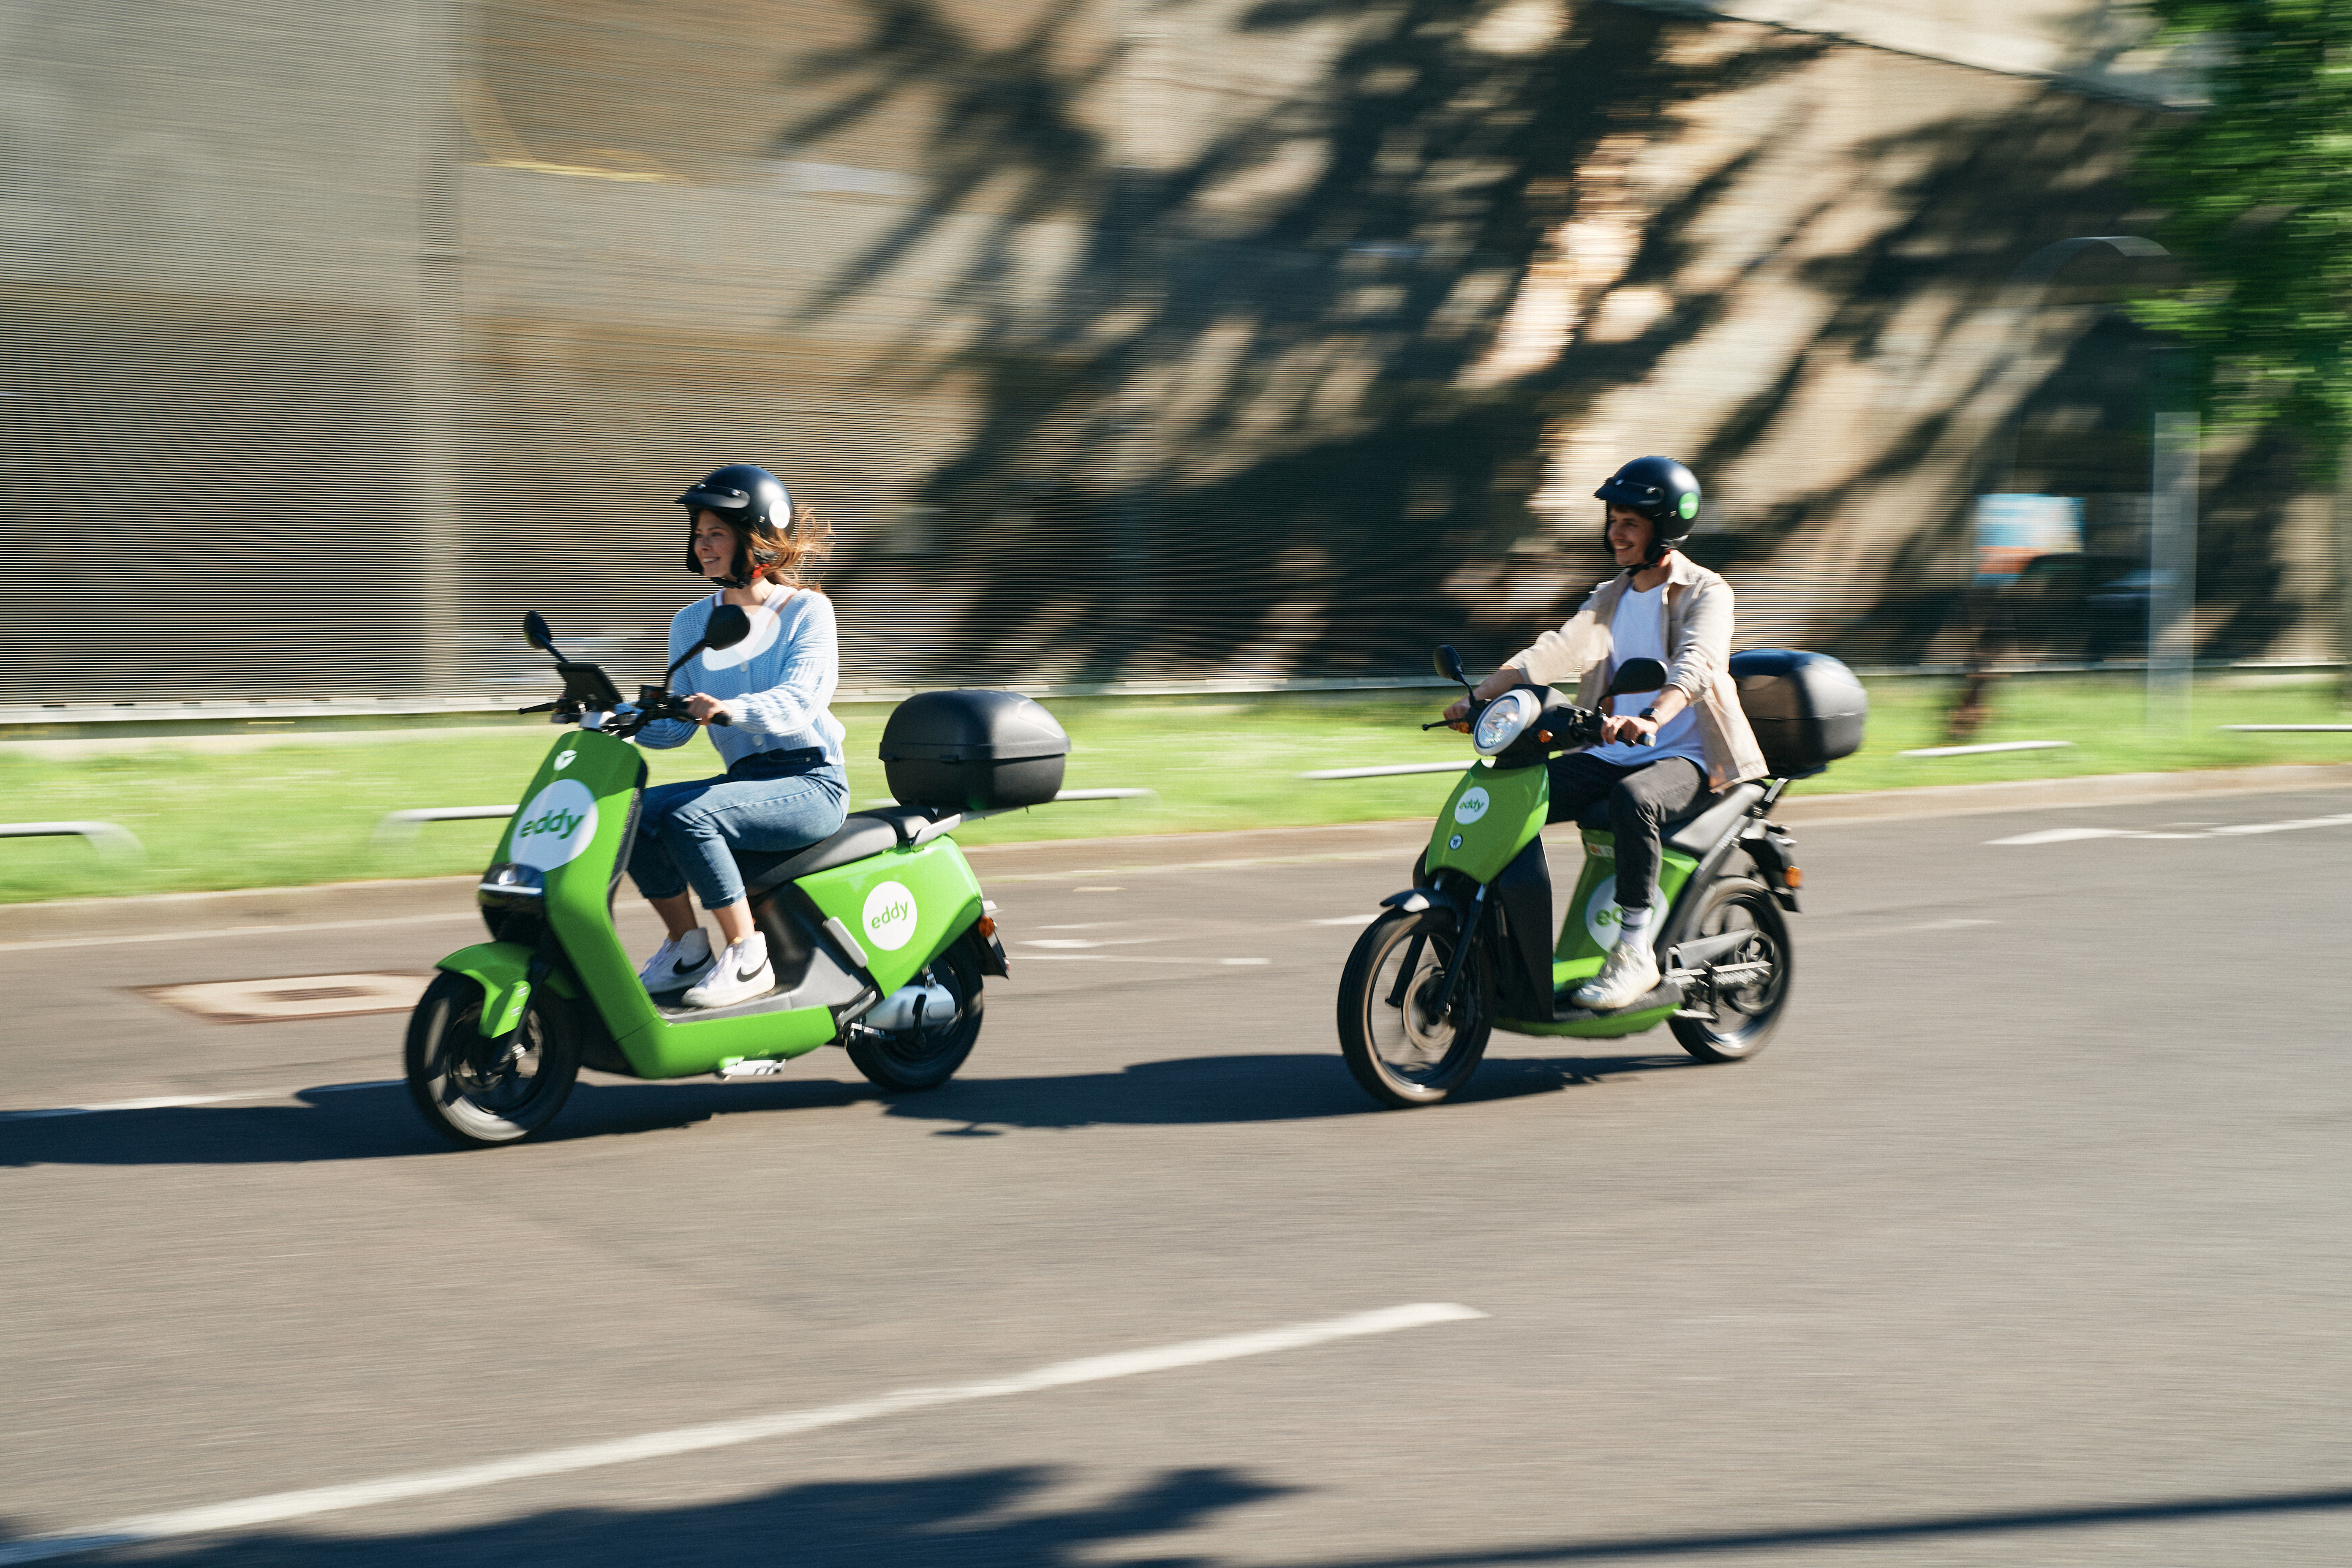 Eddy card image with causcasian people smiling together and riding electric moped.